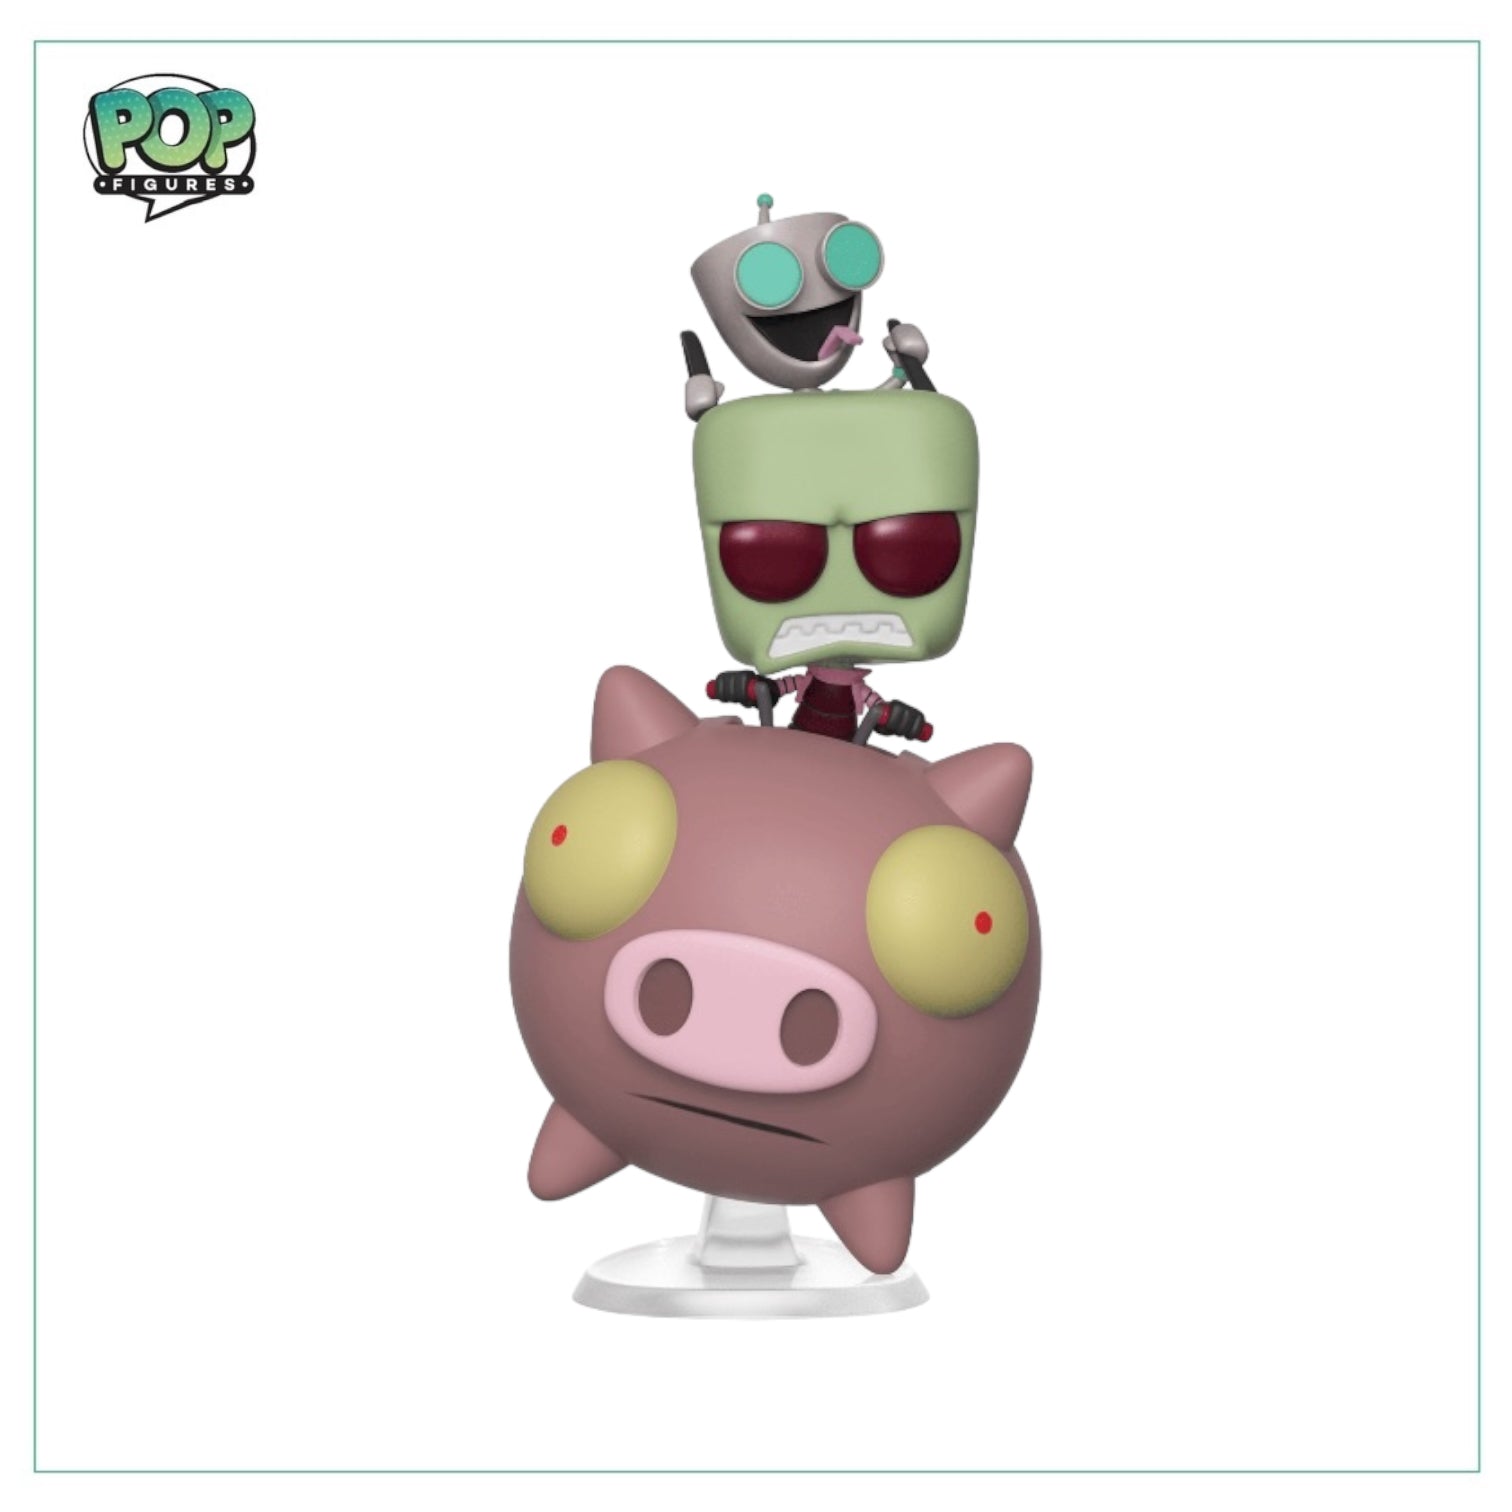 Zim & Gir on The Pig #41 Deluxe Funko Pop! Invader Zim, Hot Topic Exclusive